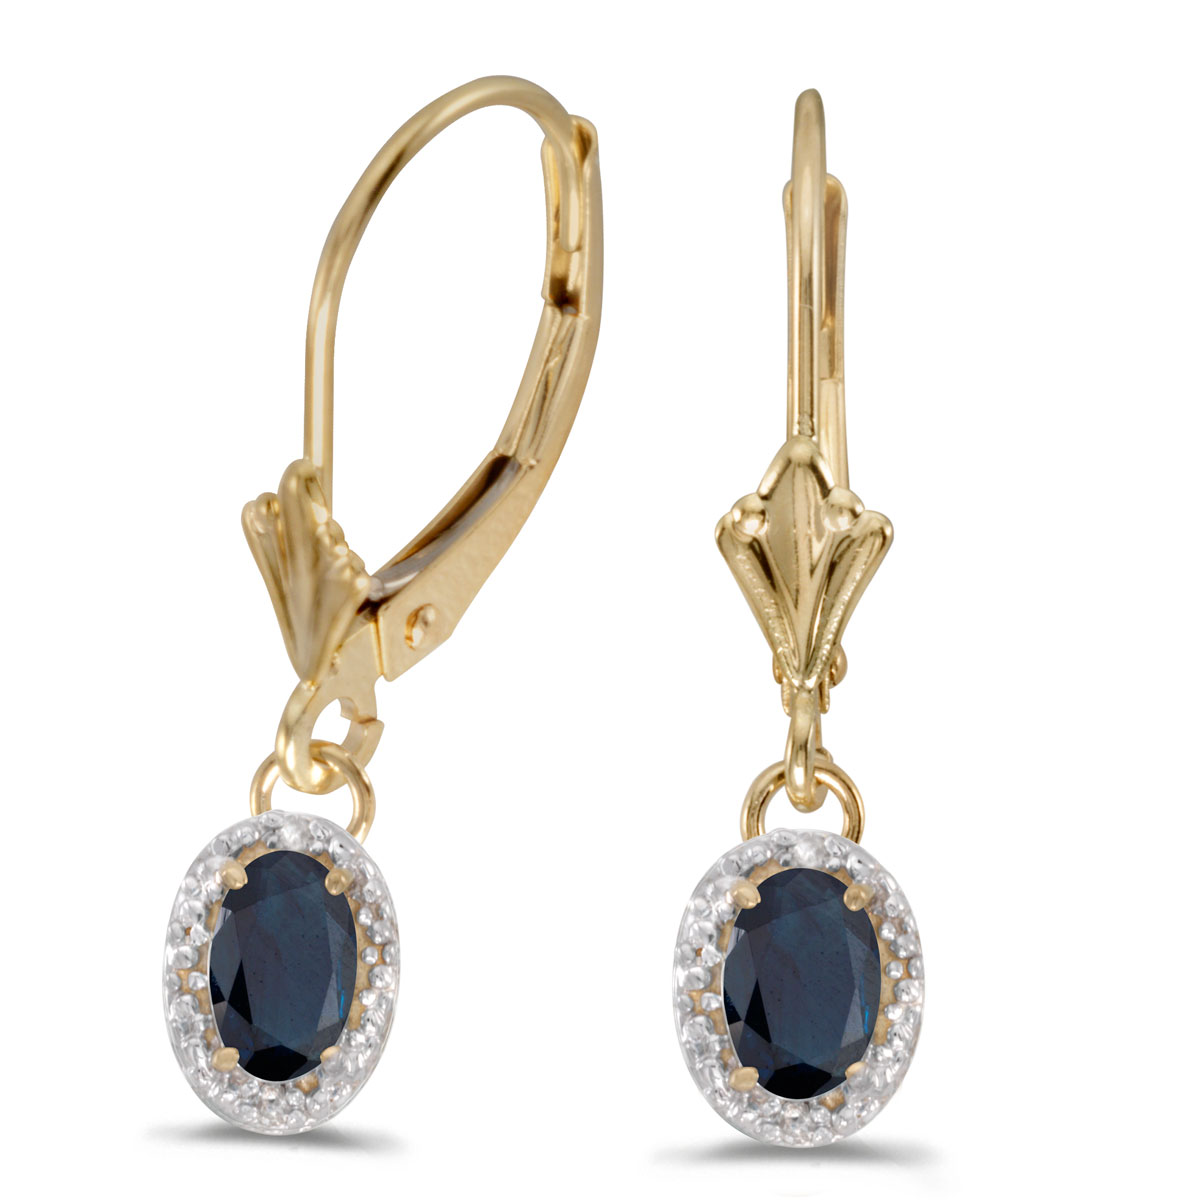 Beautiful 10k yellow gold leverback earrings with bold 6x4 mm sapphires complemented with bright ...